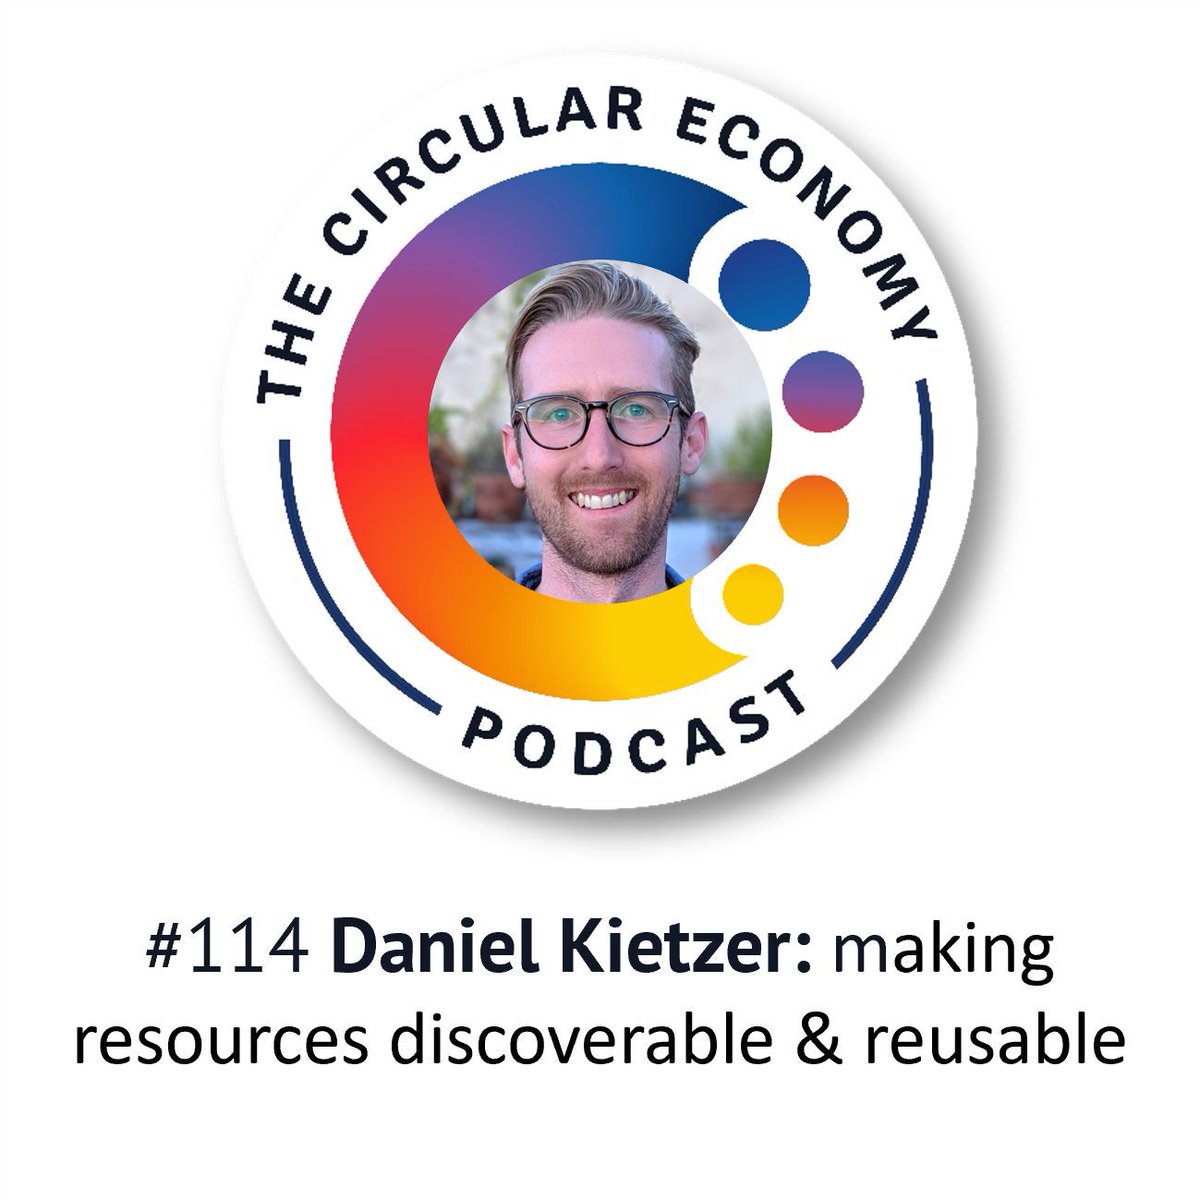 Listen to Daniel Kietzer, Director of Sustainability, in Episode 114 of the Circular Economy podcast with Catherine Weetman! Daniel shares some of the recent developments at Rheaply, including the use of AI tools to make posting reusable materials easier buff.ly/3rDIsRn